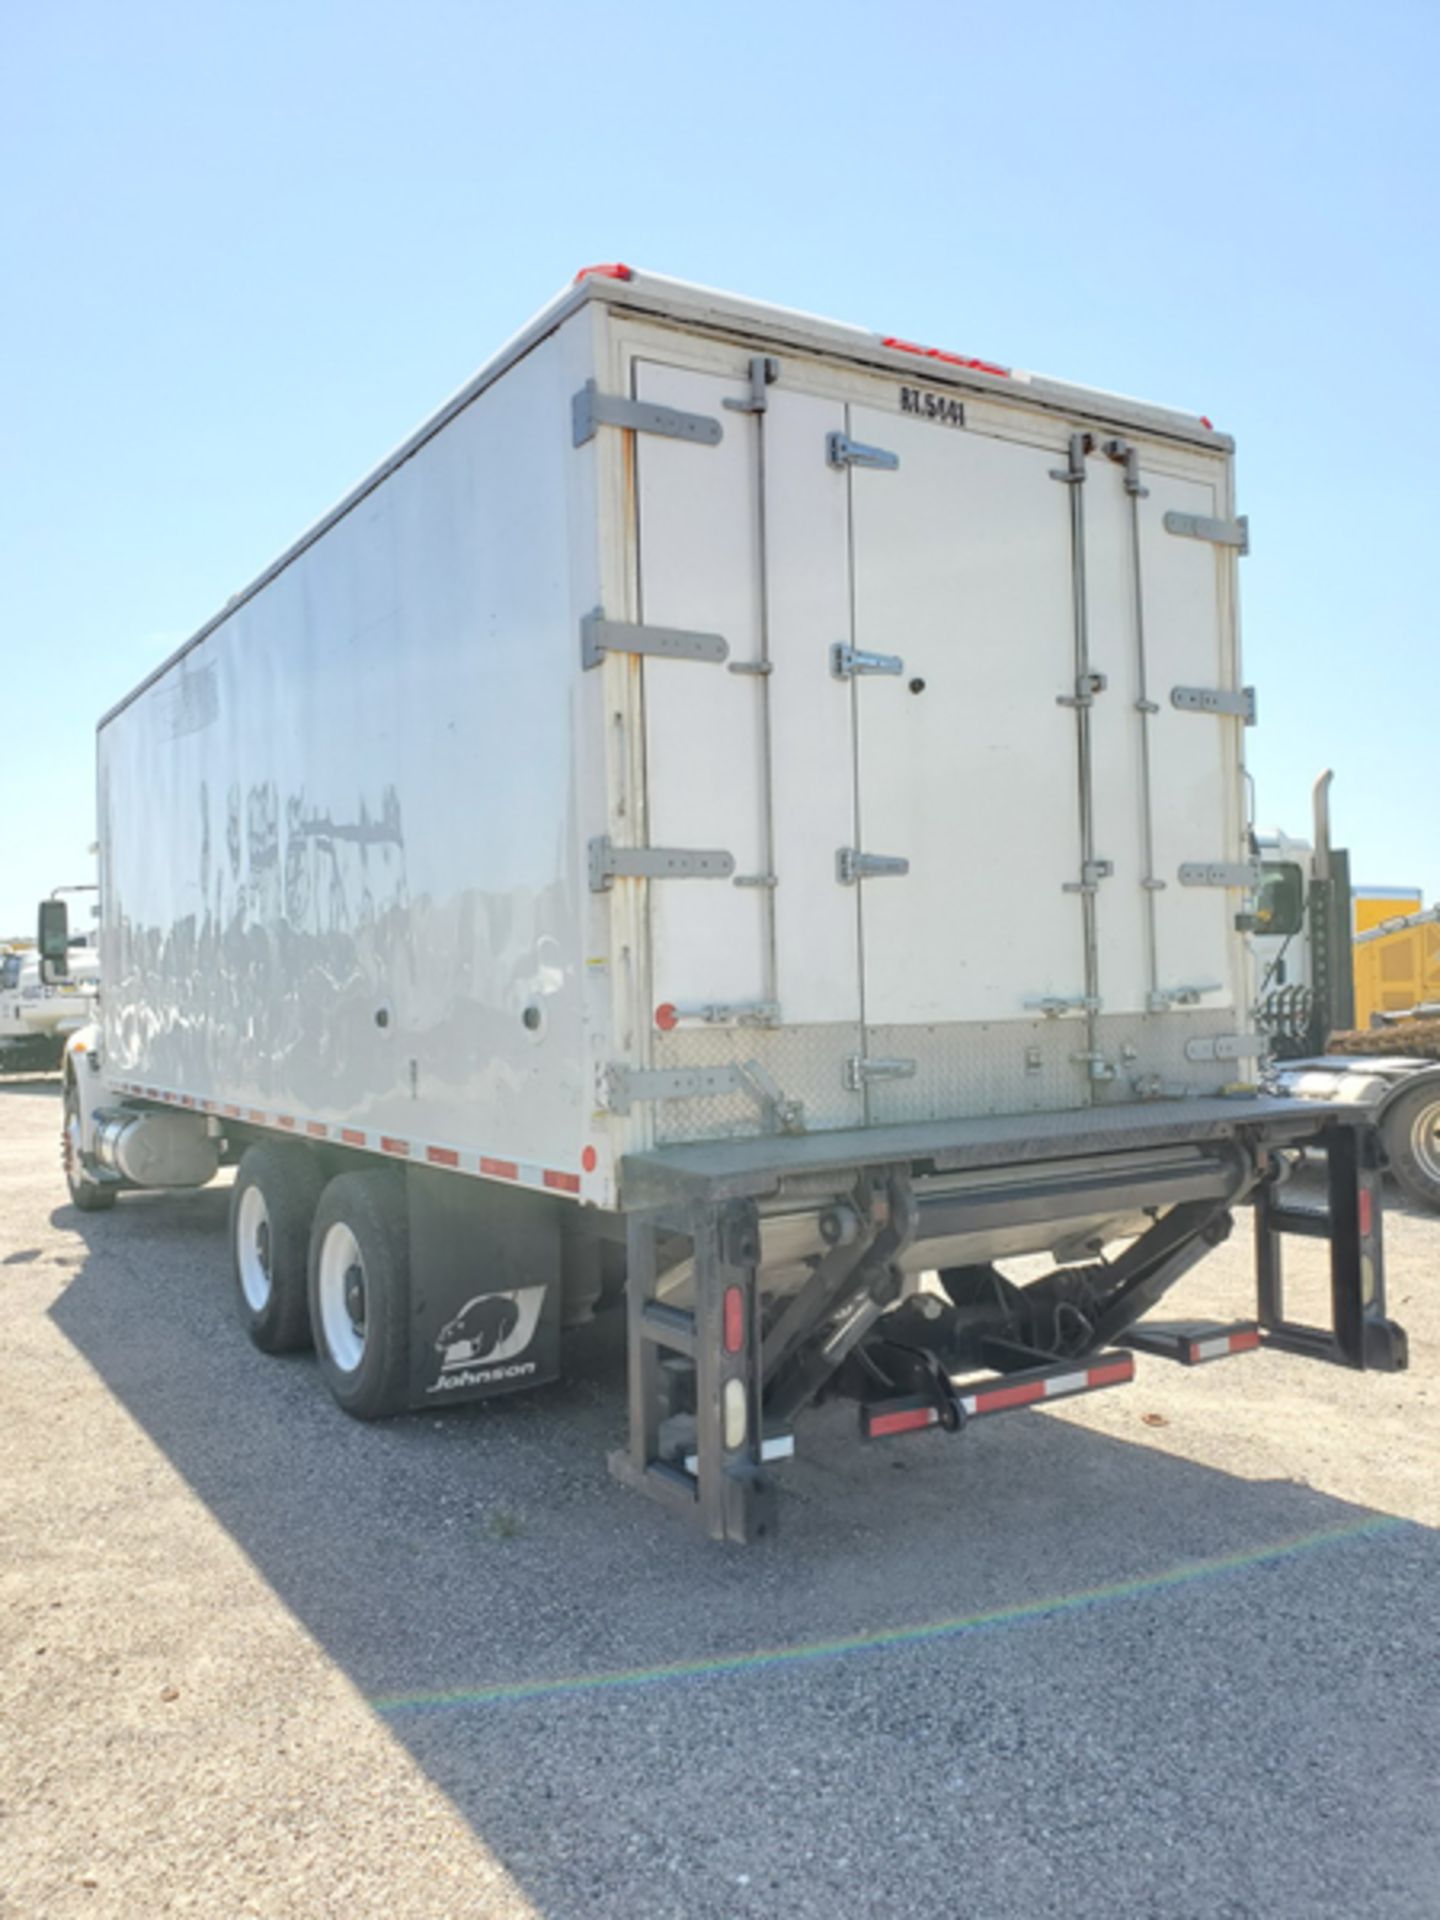 2018 INTERNATIONAL 4400 SBA 6X4 REFRIGERATED BOX TRUCK VIN#: 1HTMSTAR5JH529833, Approx Miles: 26232, - Image 4 of 9